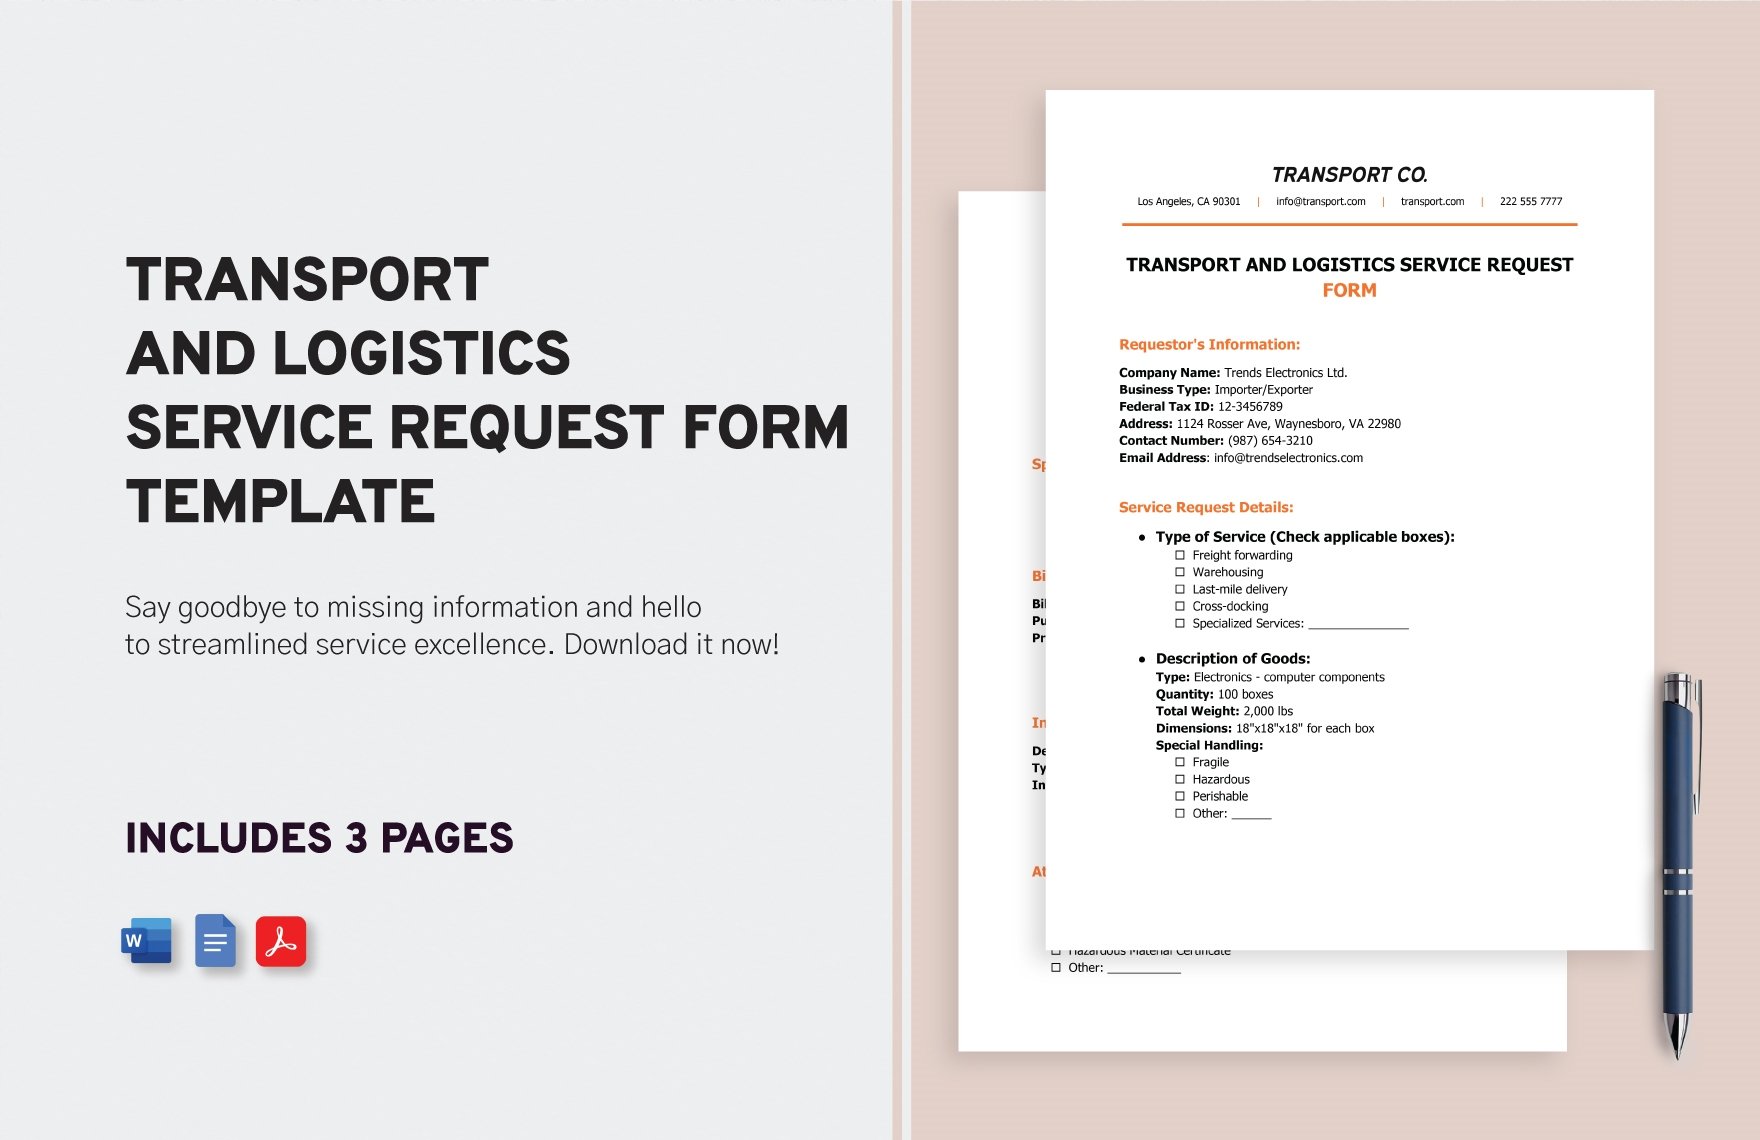 Transport and Logistics Service Request Form Template in Word, Google Docs, PDF